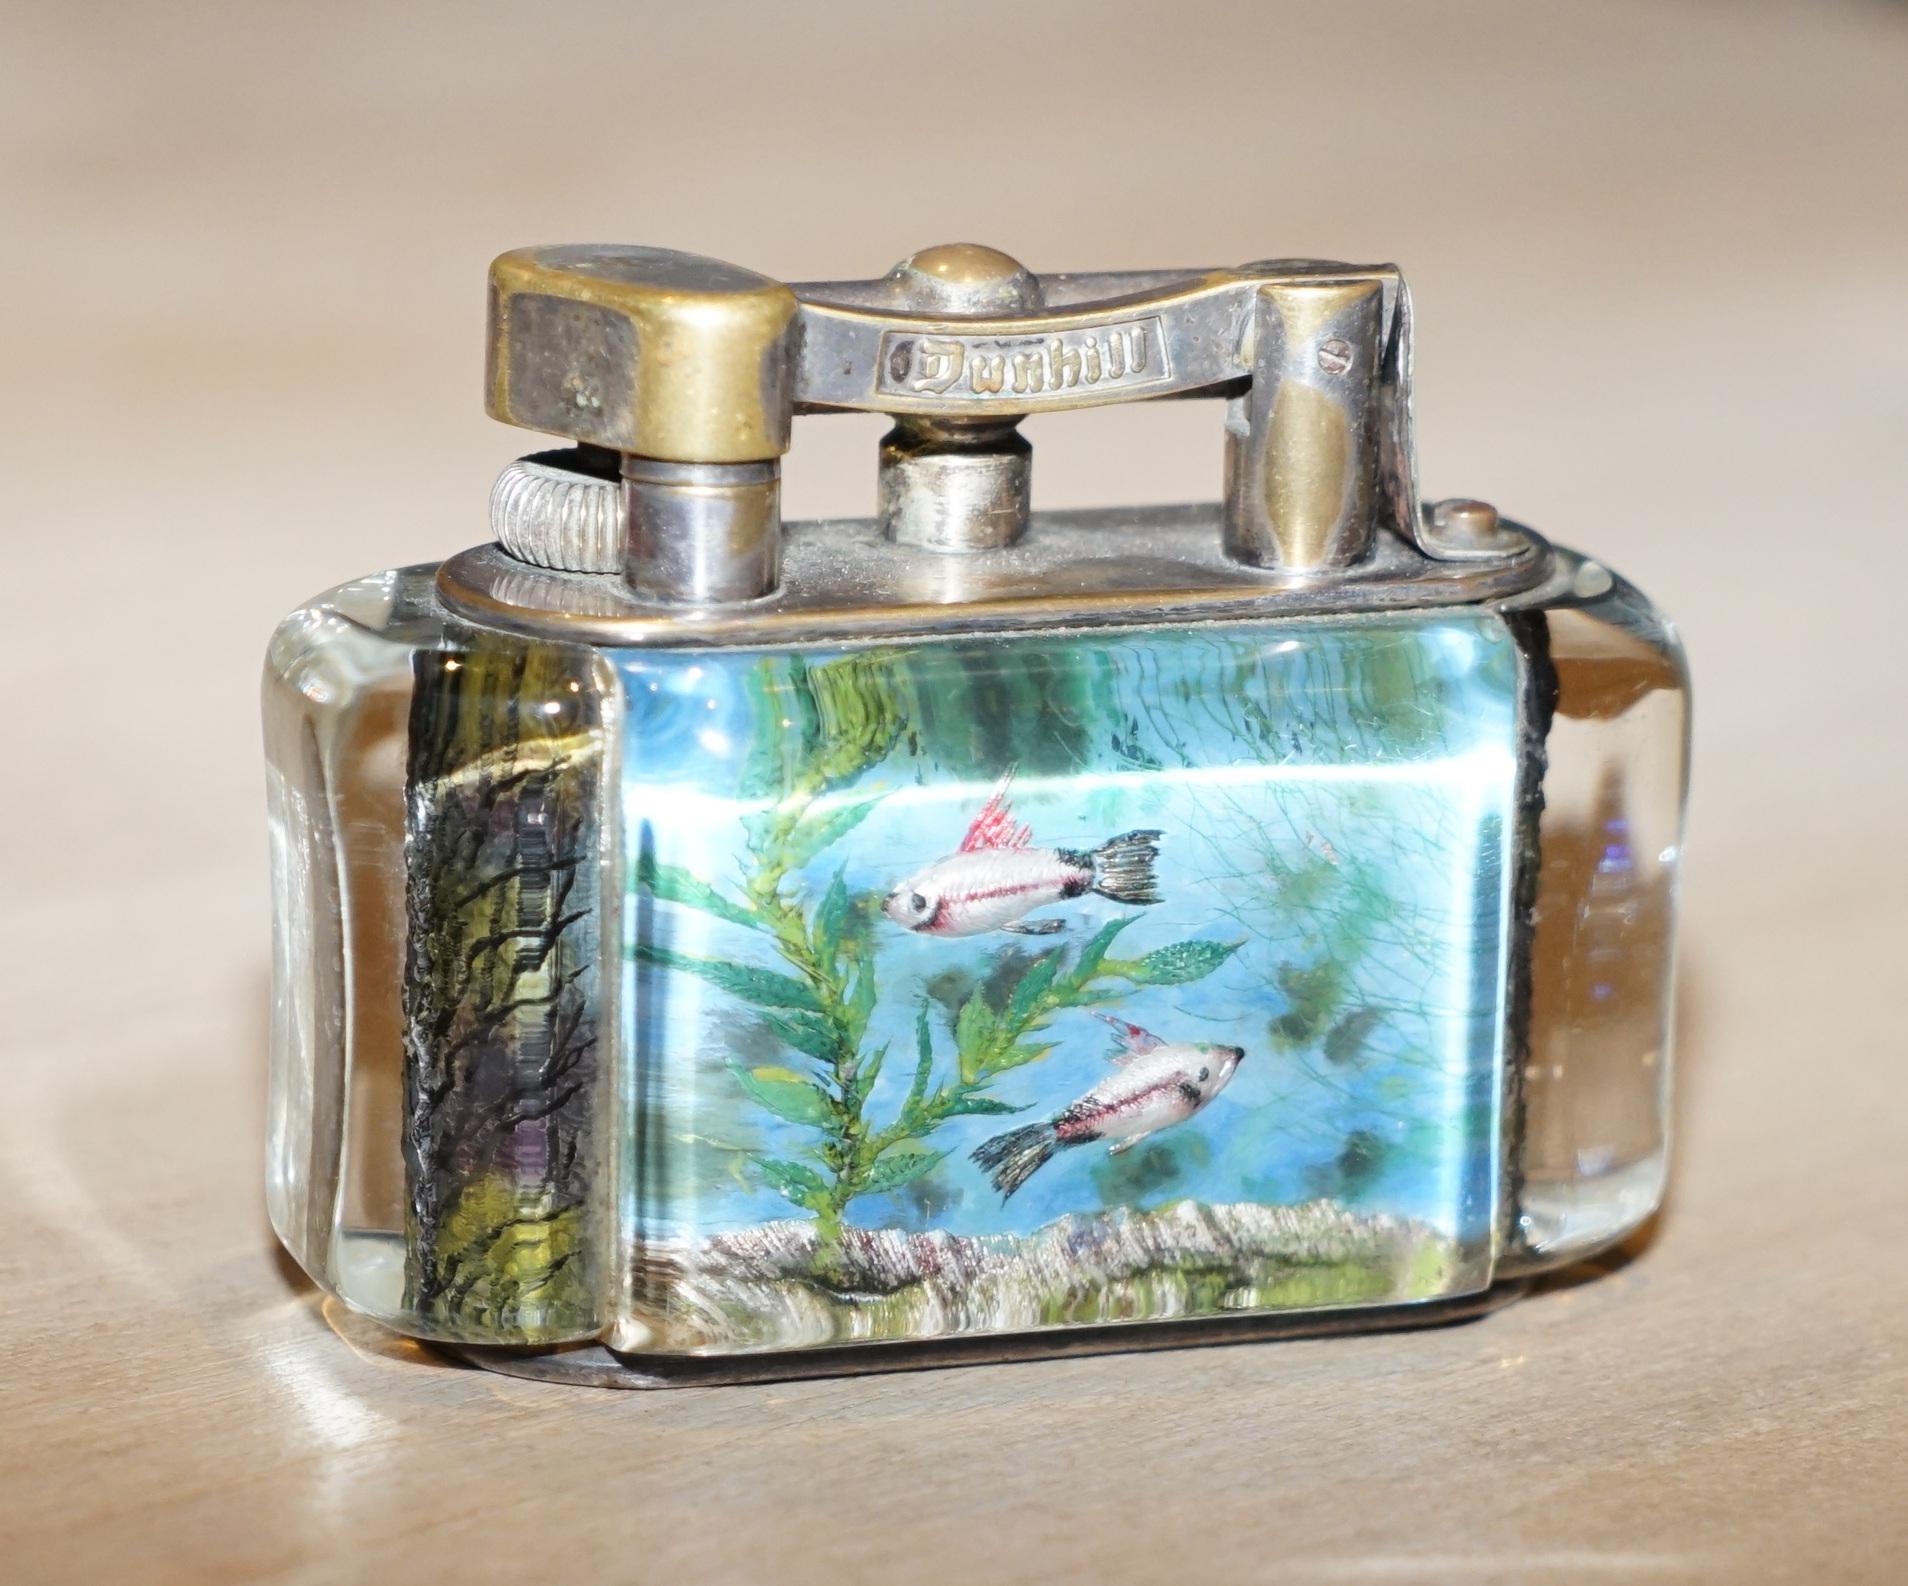 We are delighted to offer for sale this exceedingly rare original 1950’s hand made in England oversized Dunhill Aquarium table lighter.

This is an exceptionally rare piece, it is a one-off handmade item that will never be replicated again, the